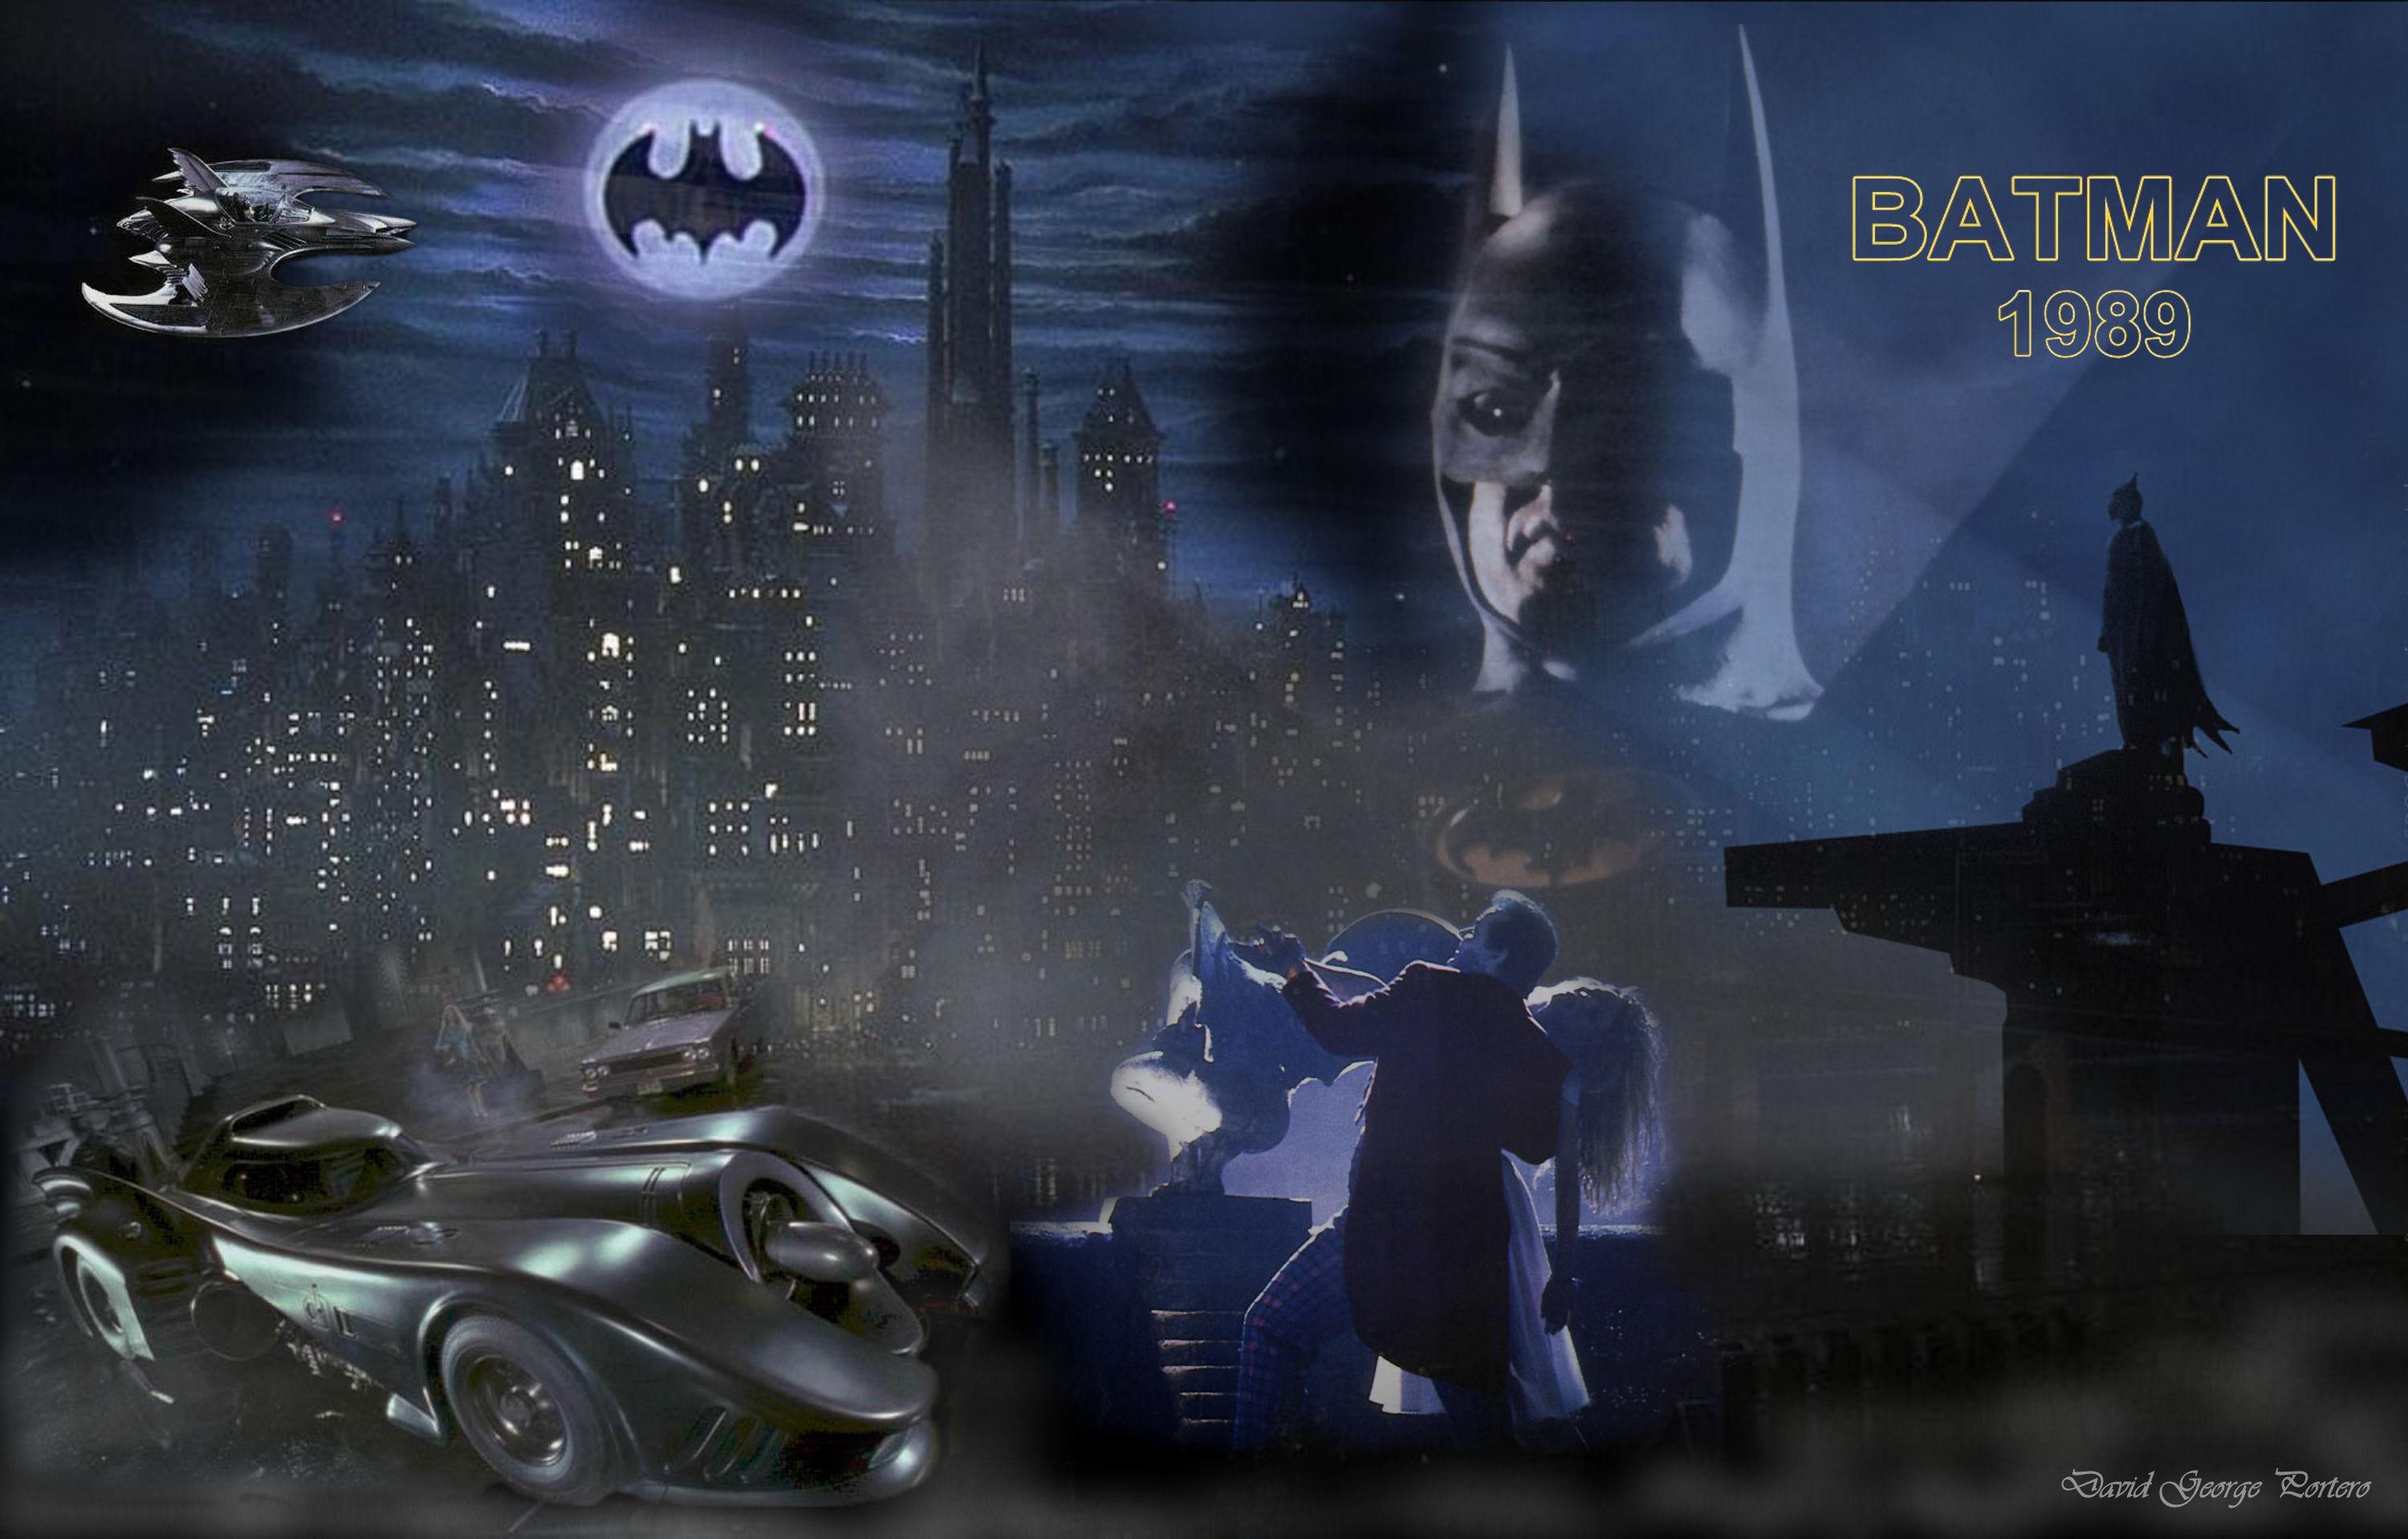 Batman 1989   124585   High Quality and Resolution Wallpapers on